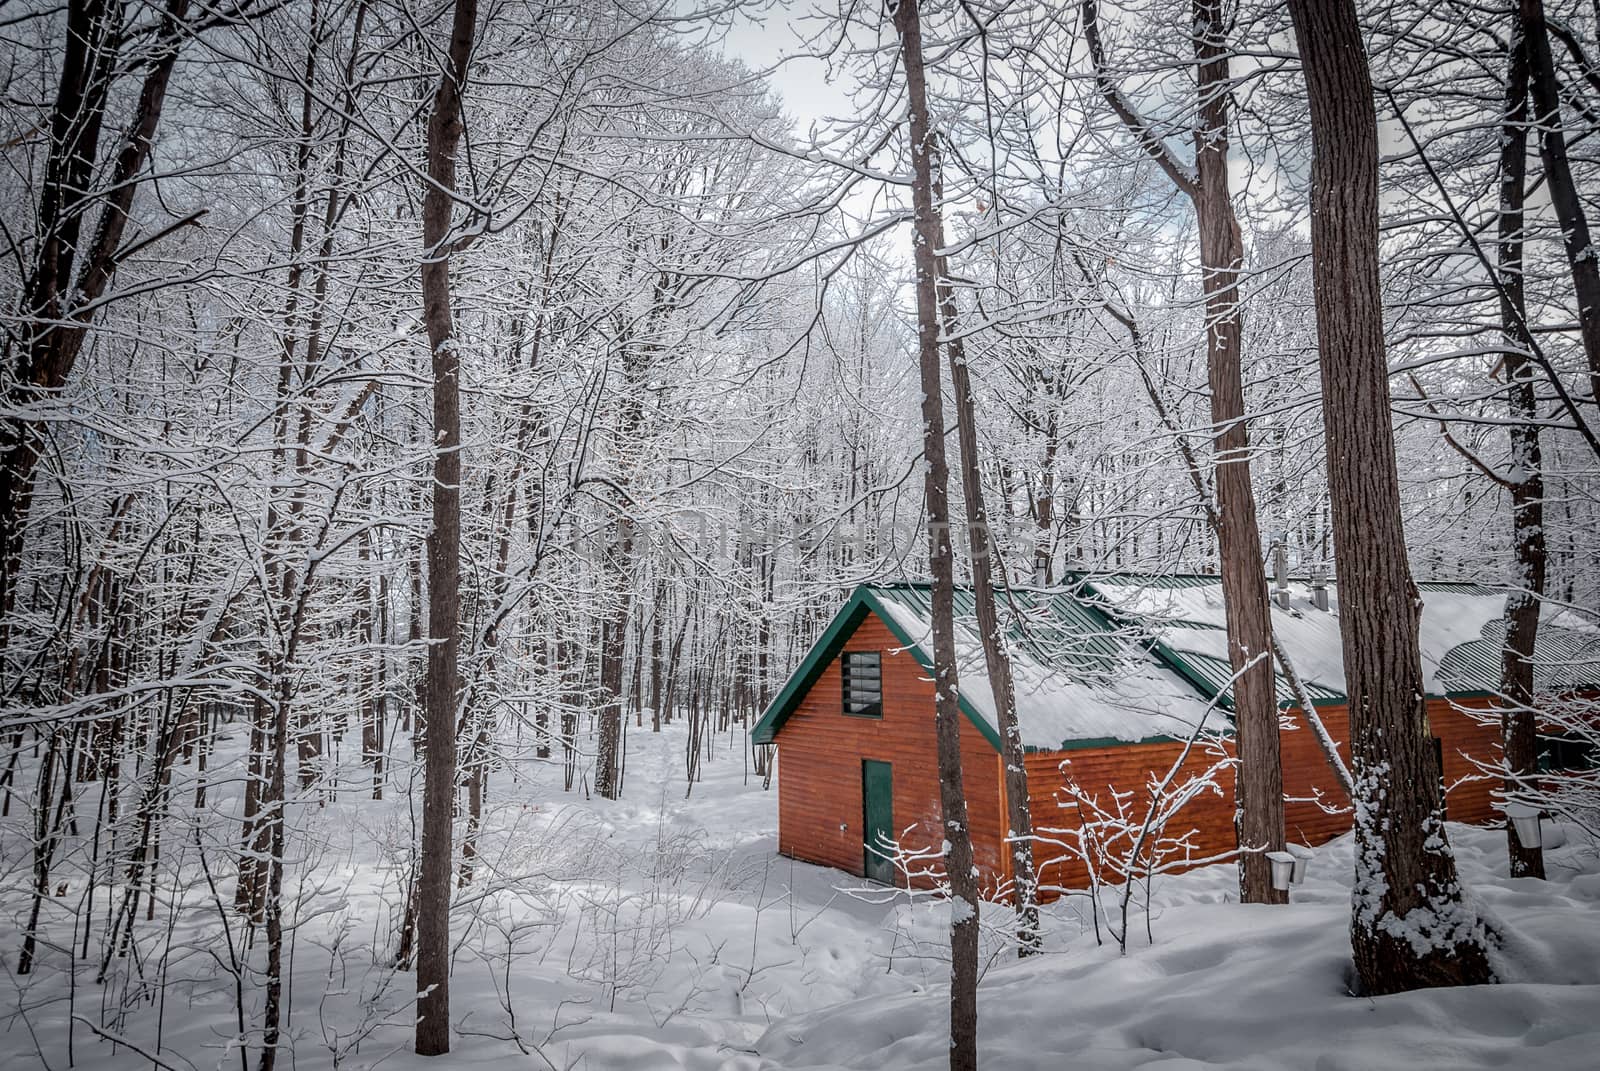 A walk through the woods and a visit to the maple syrup bush sugar shack.